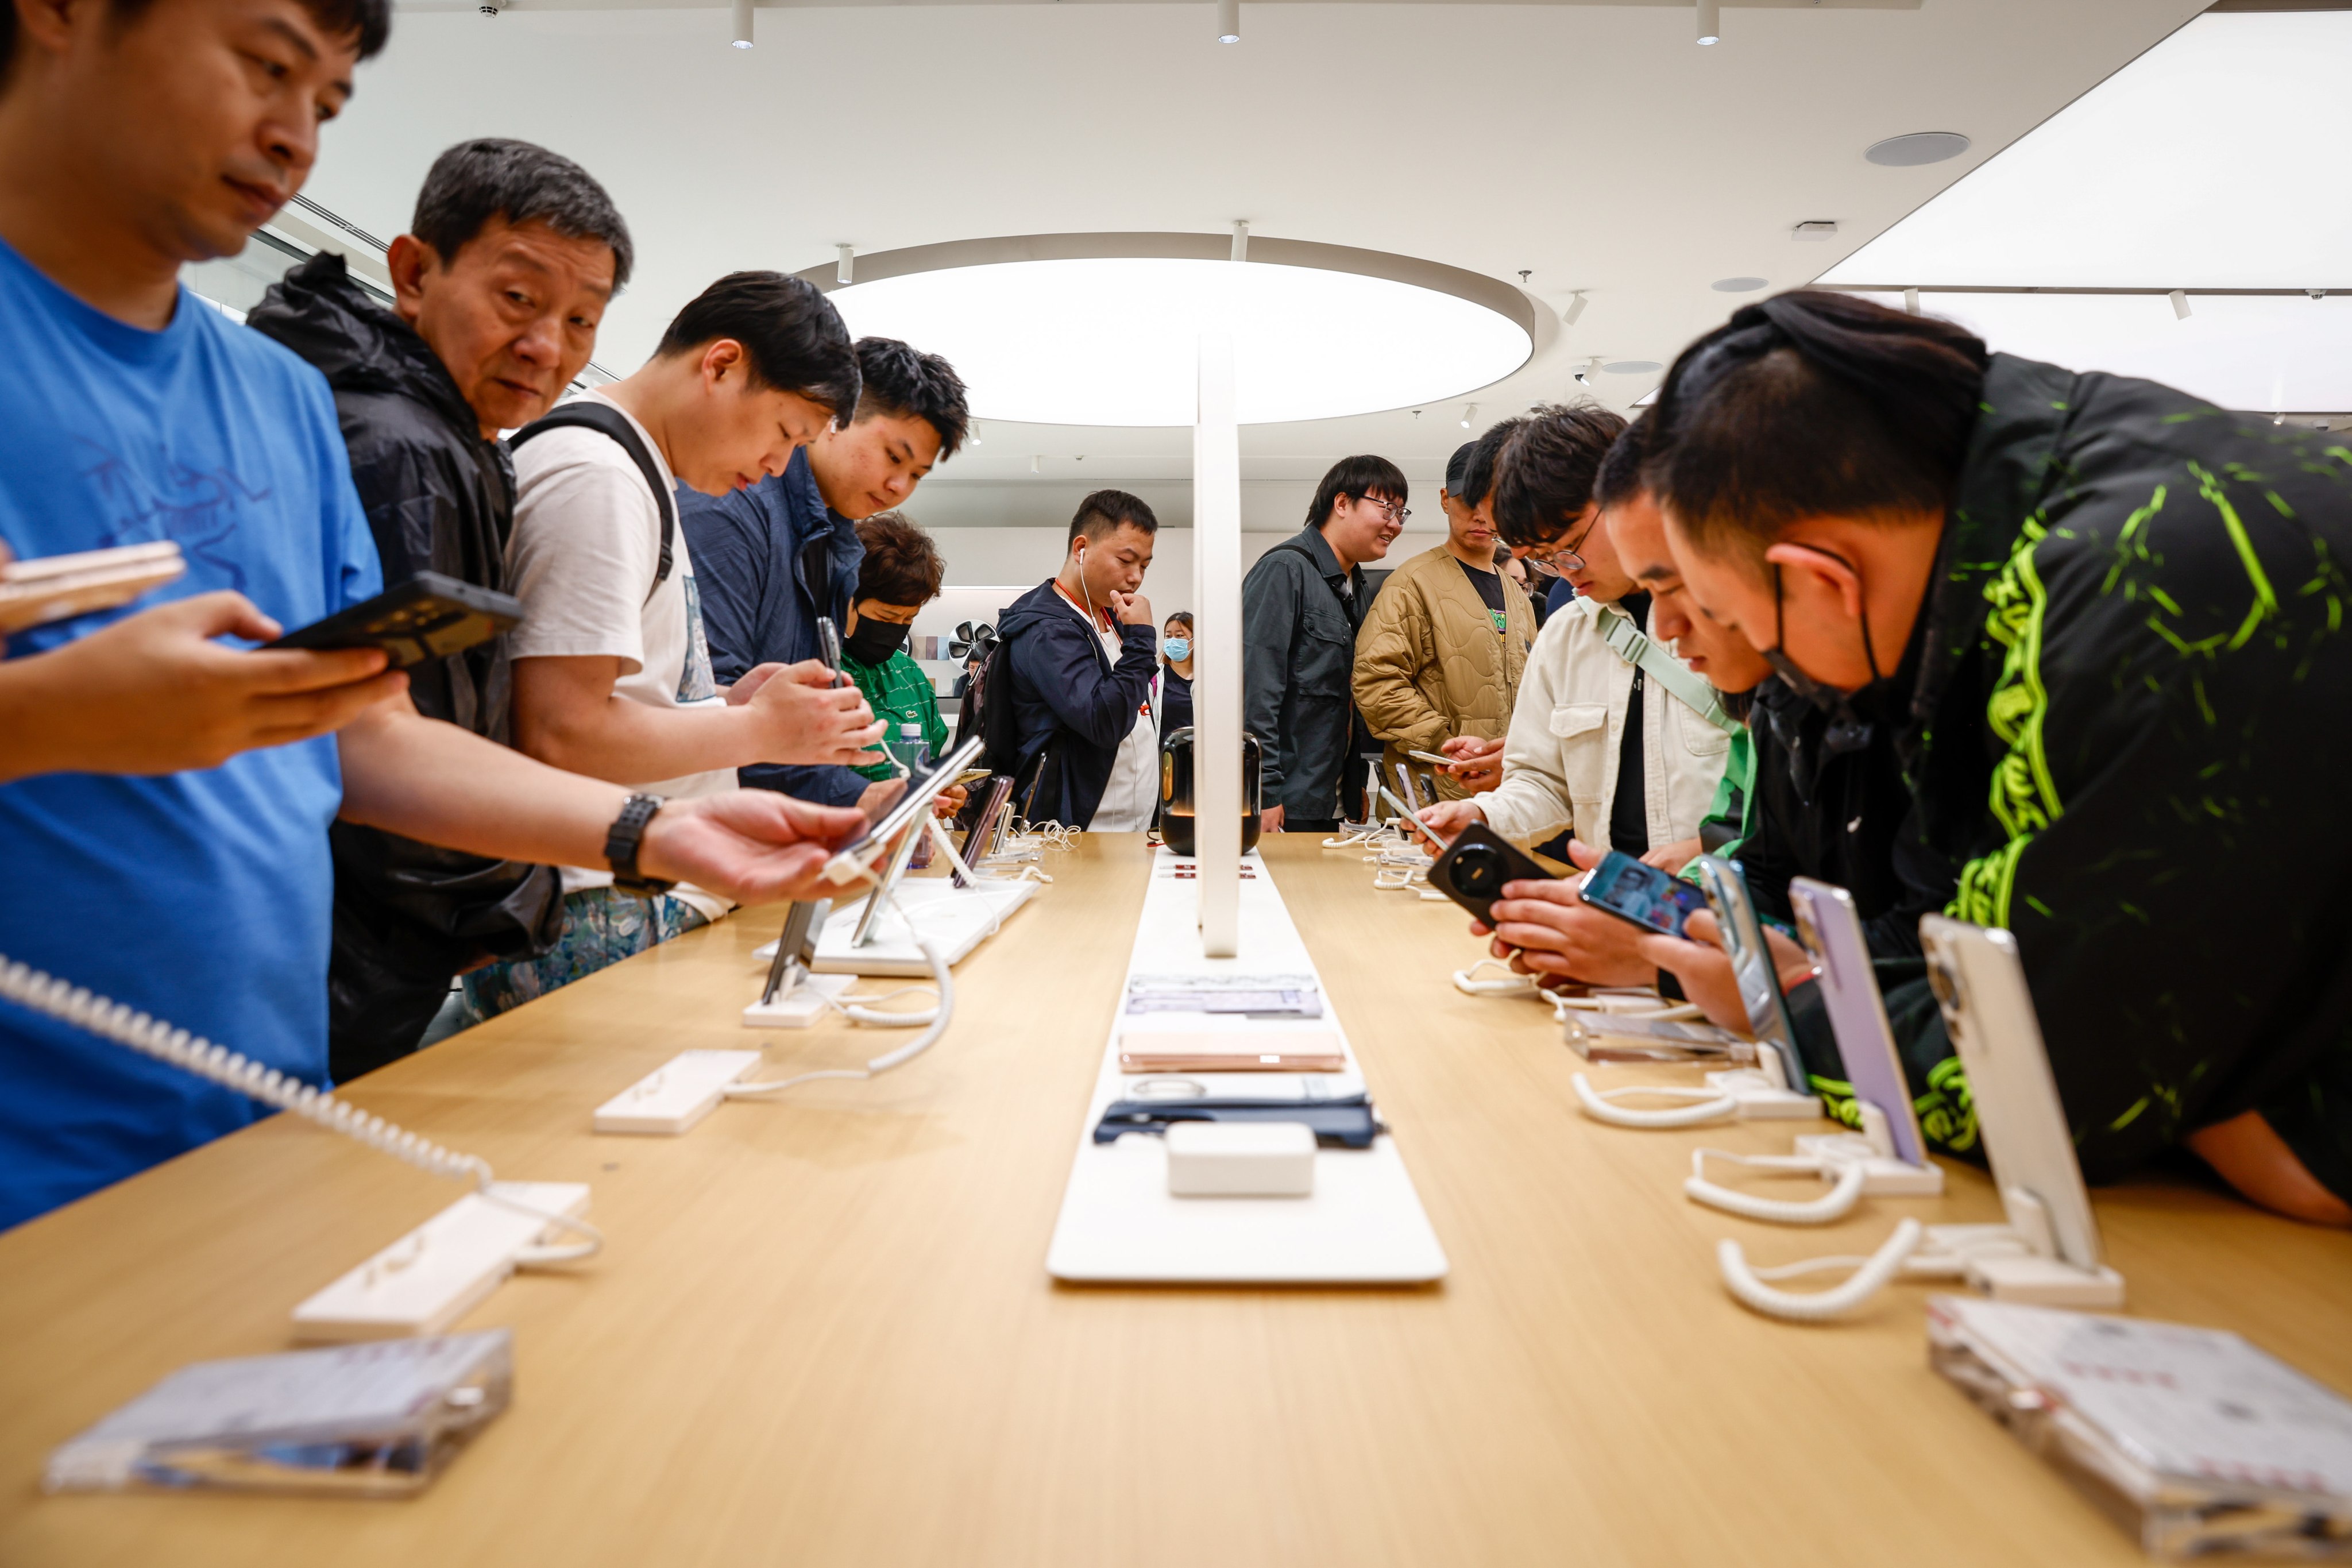 People check out the latest Huawei phone at a store in Beijing on September 25. It should come as no surprise that Huawei has responded strategically to America’s aggressive tactical campaign to restrict its core businesses and supply-chain dependencies. Photo: EPA-EFE